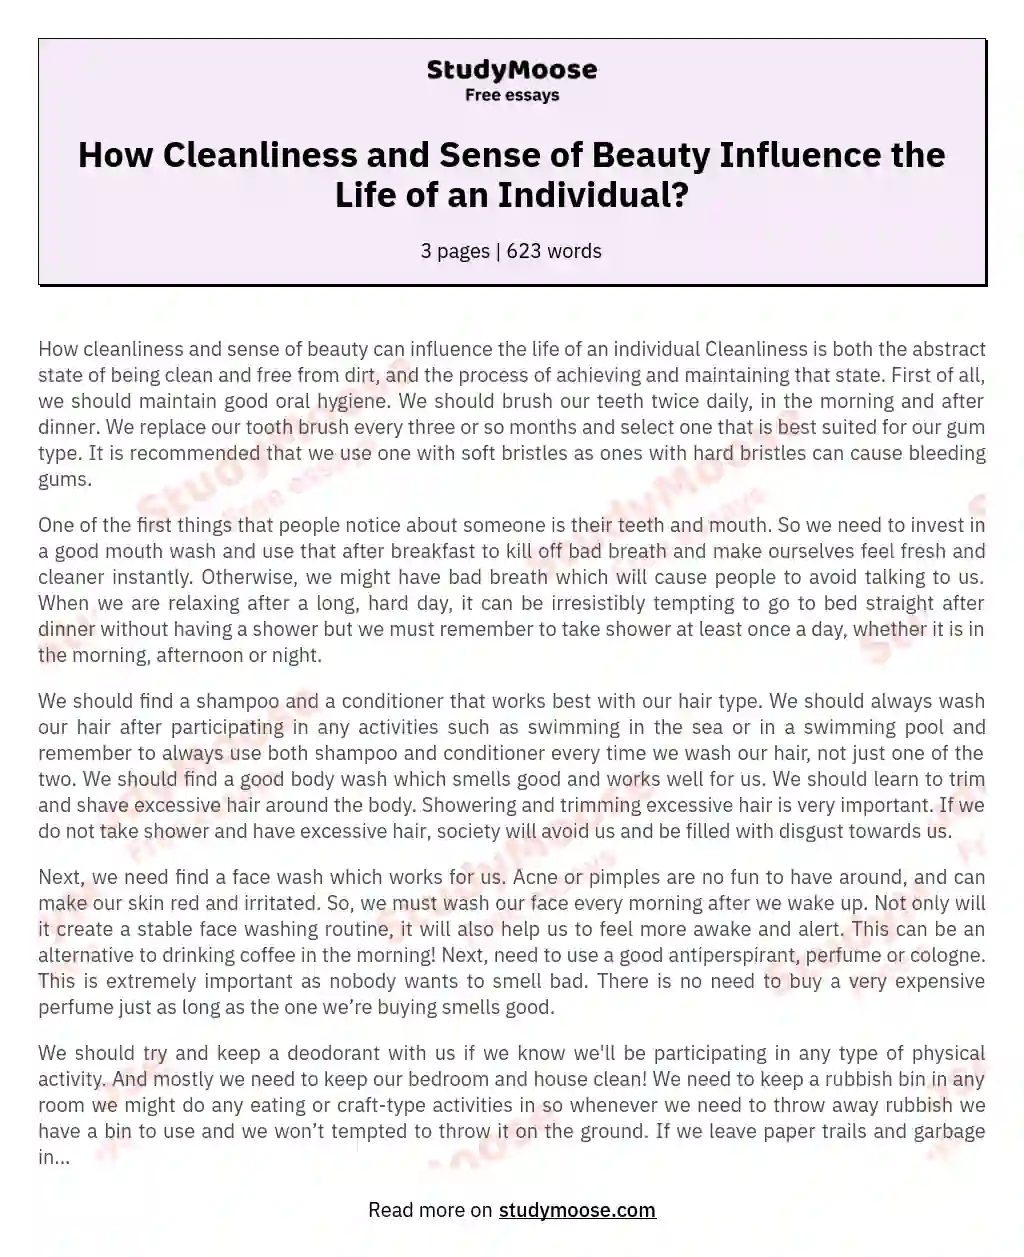 How Cleanliness and Sense of Beauty Influence the Life of an Individual? essay